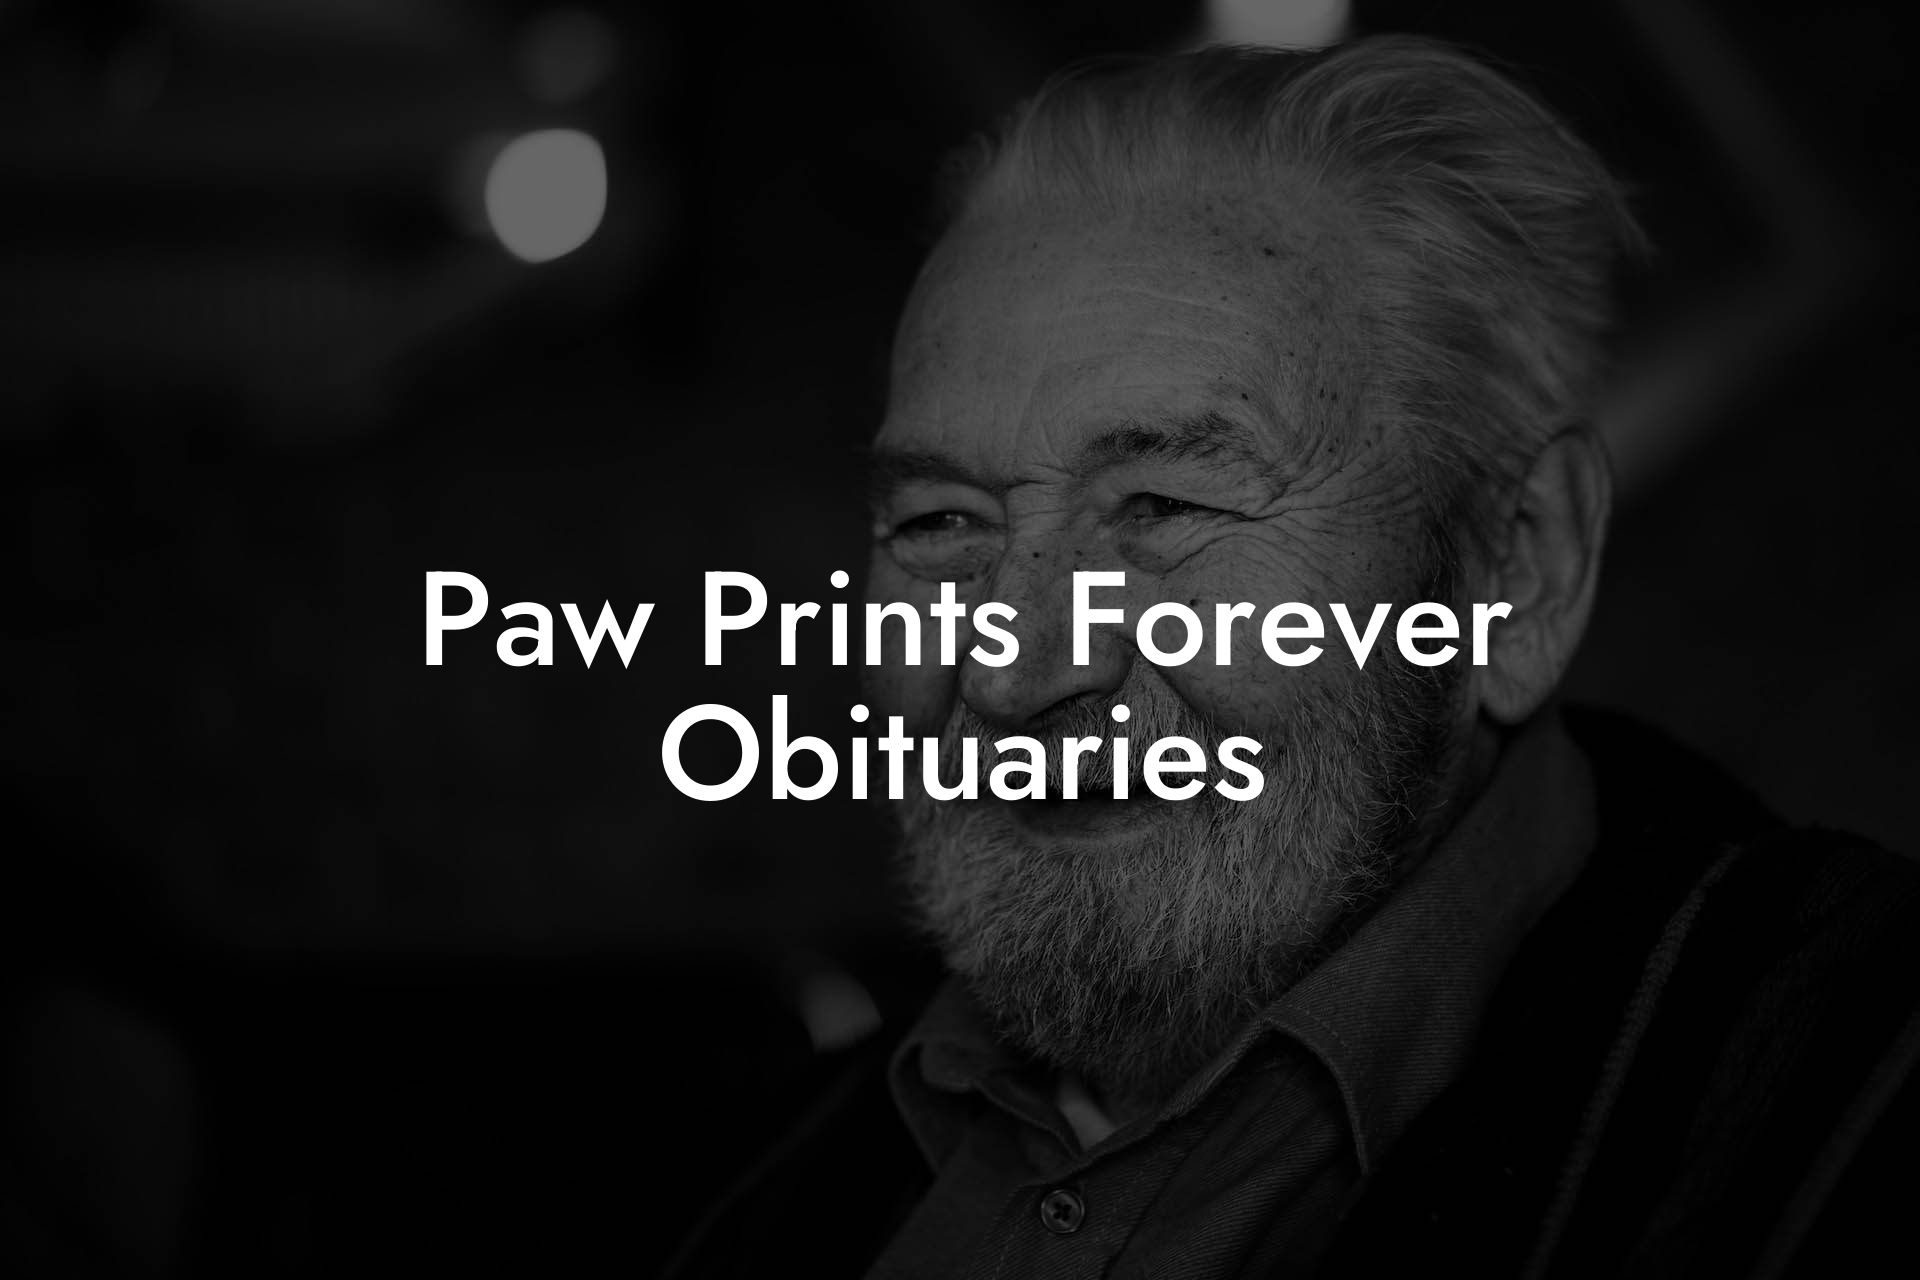 Paw Prints Forever Obituaries